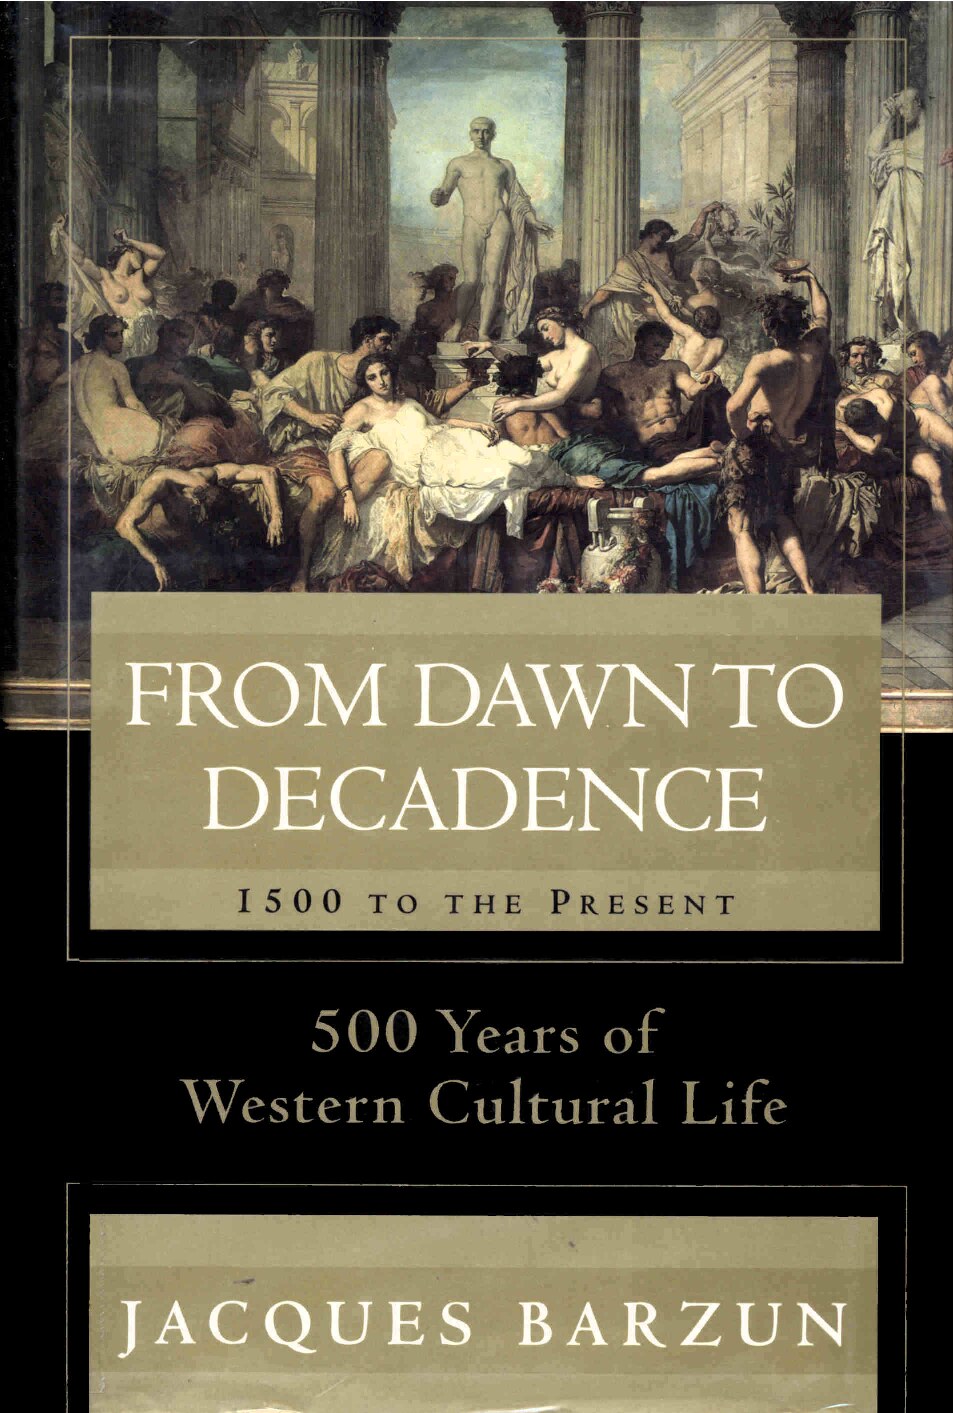 From Dawn To Decadence: 500 Years of Western Cultural Life